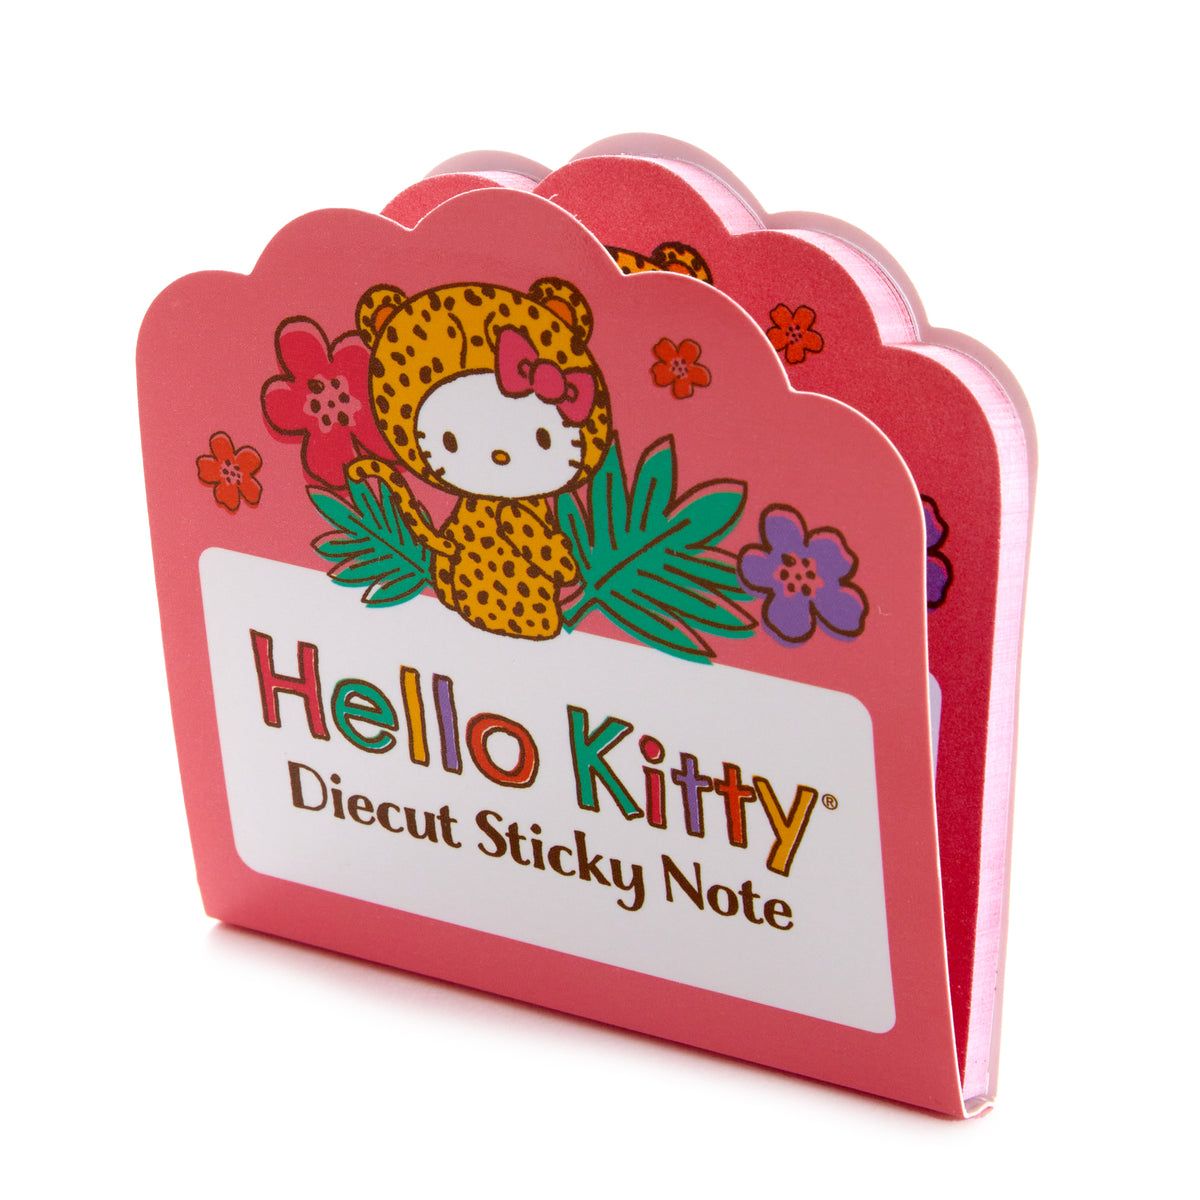 Assorted Sticky Notes, Gifts For Friends